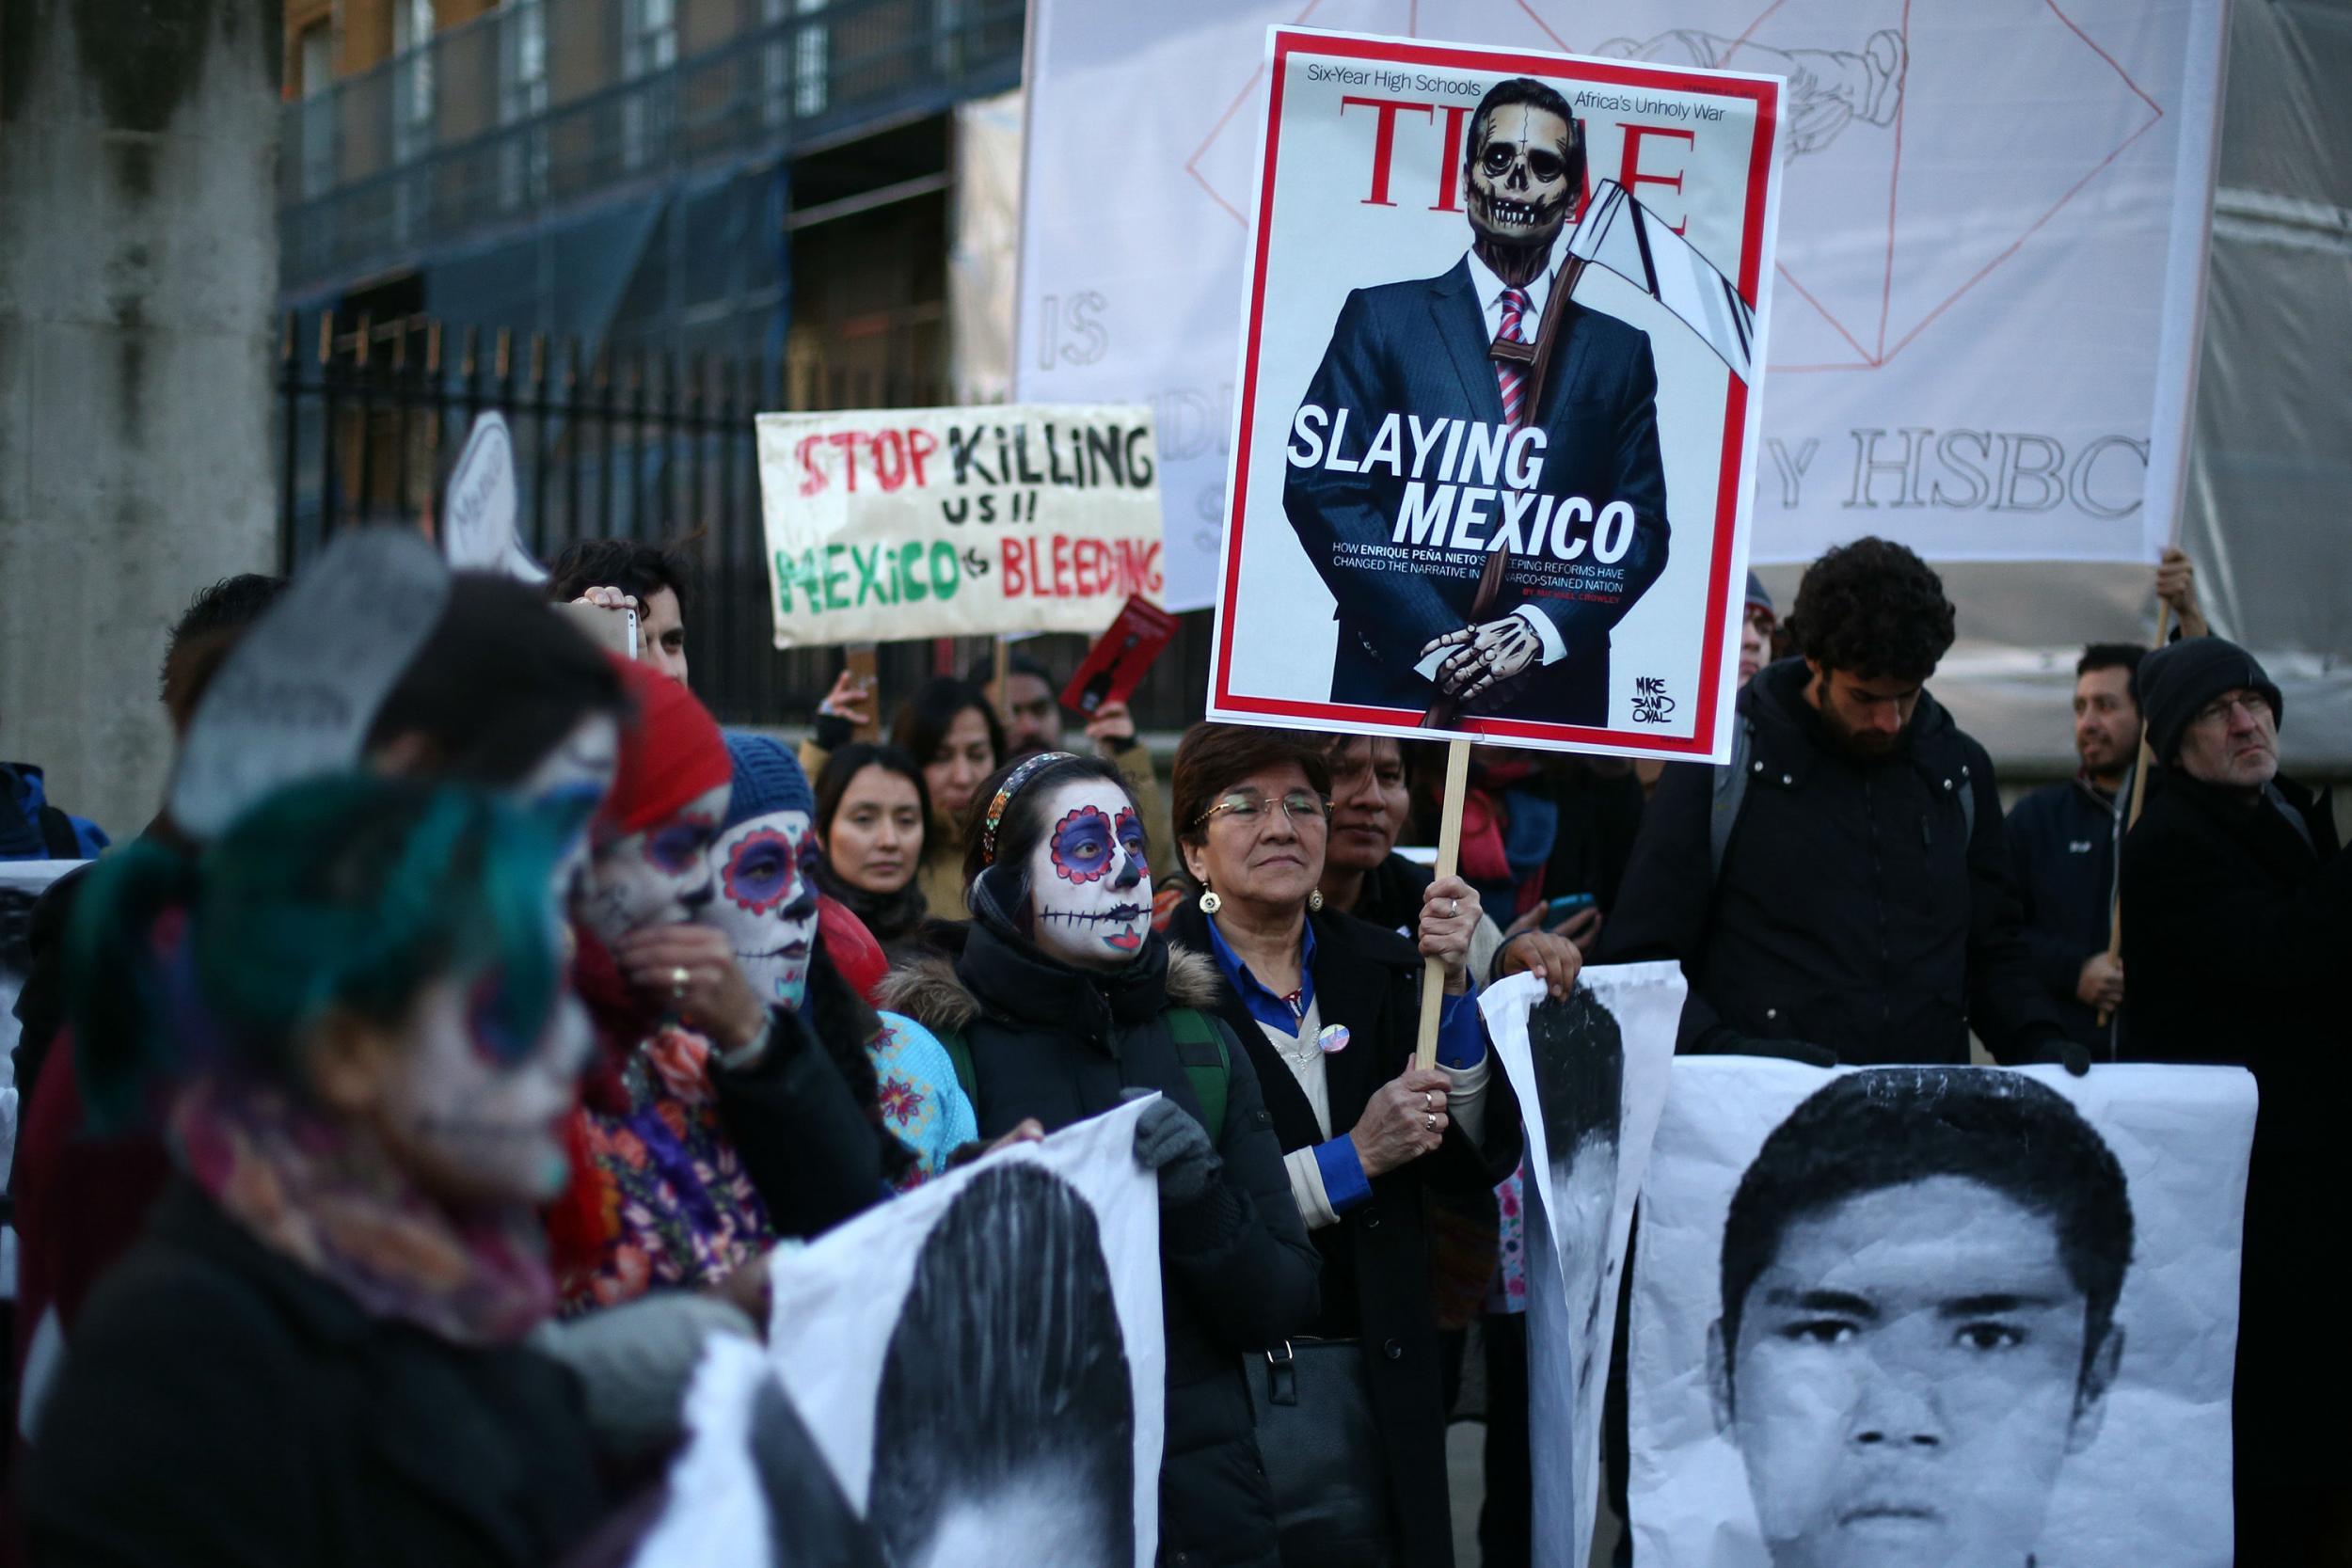 Protesters take part in a demonstration against alleged corruption and violations of human rights by Enrique Pena Nieto, the President of Mexico, on March 3, 2015 in London